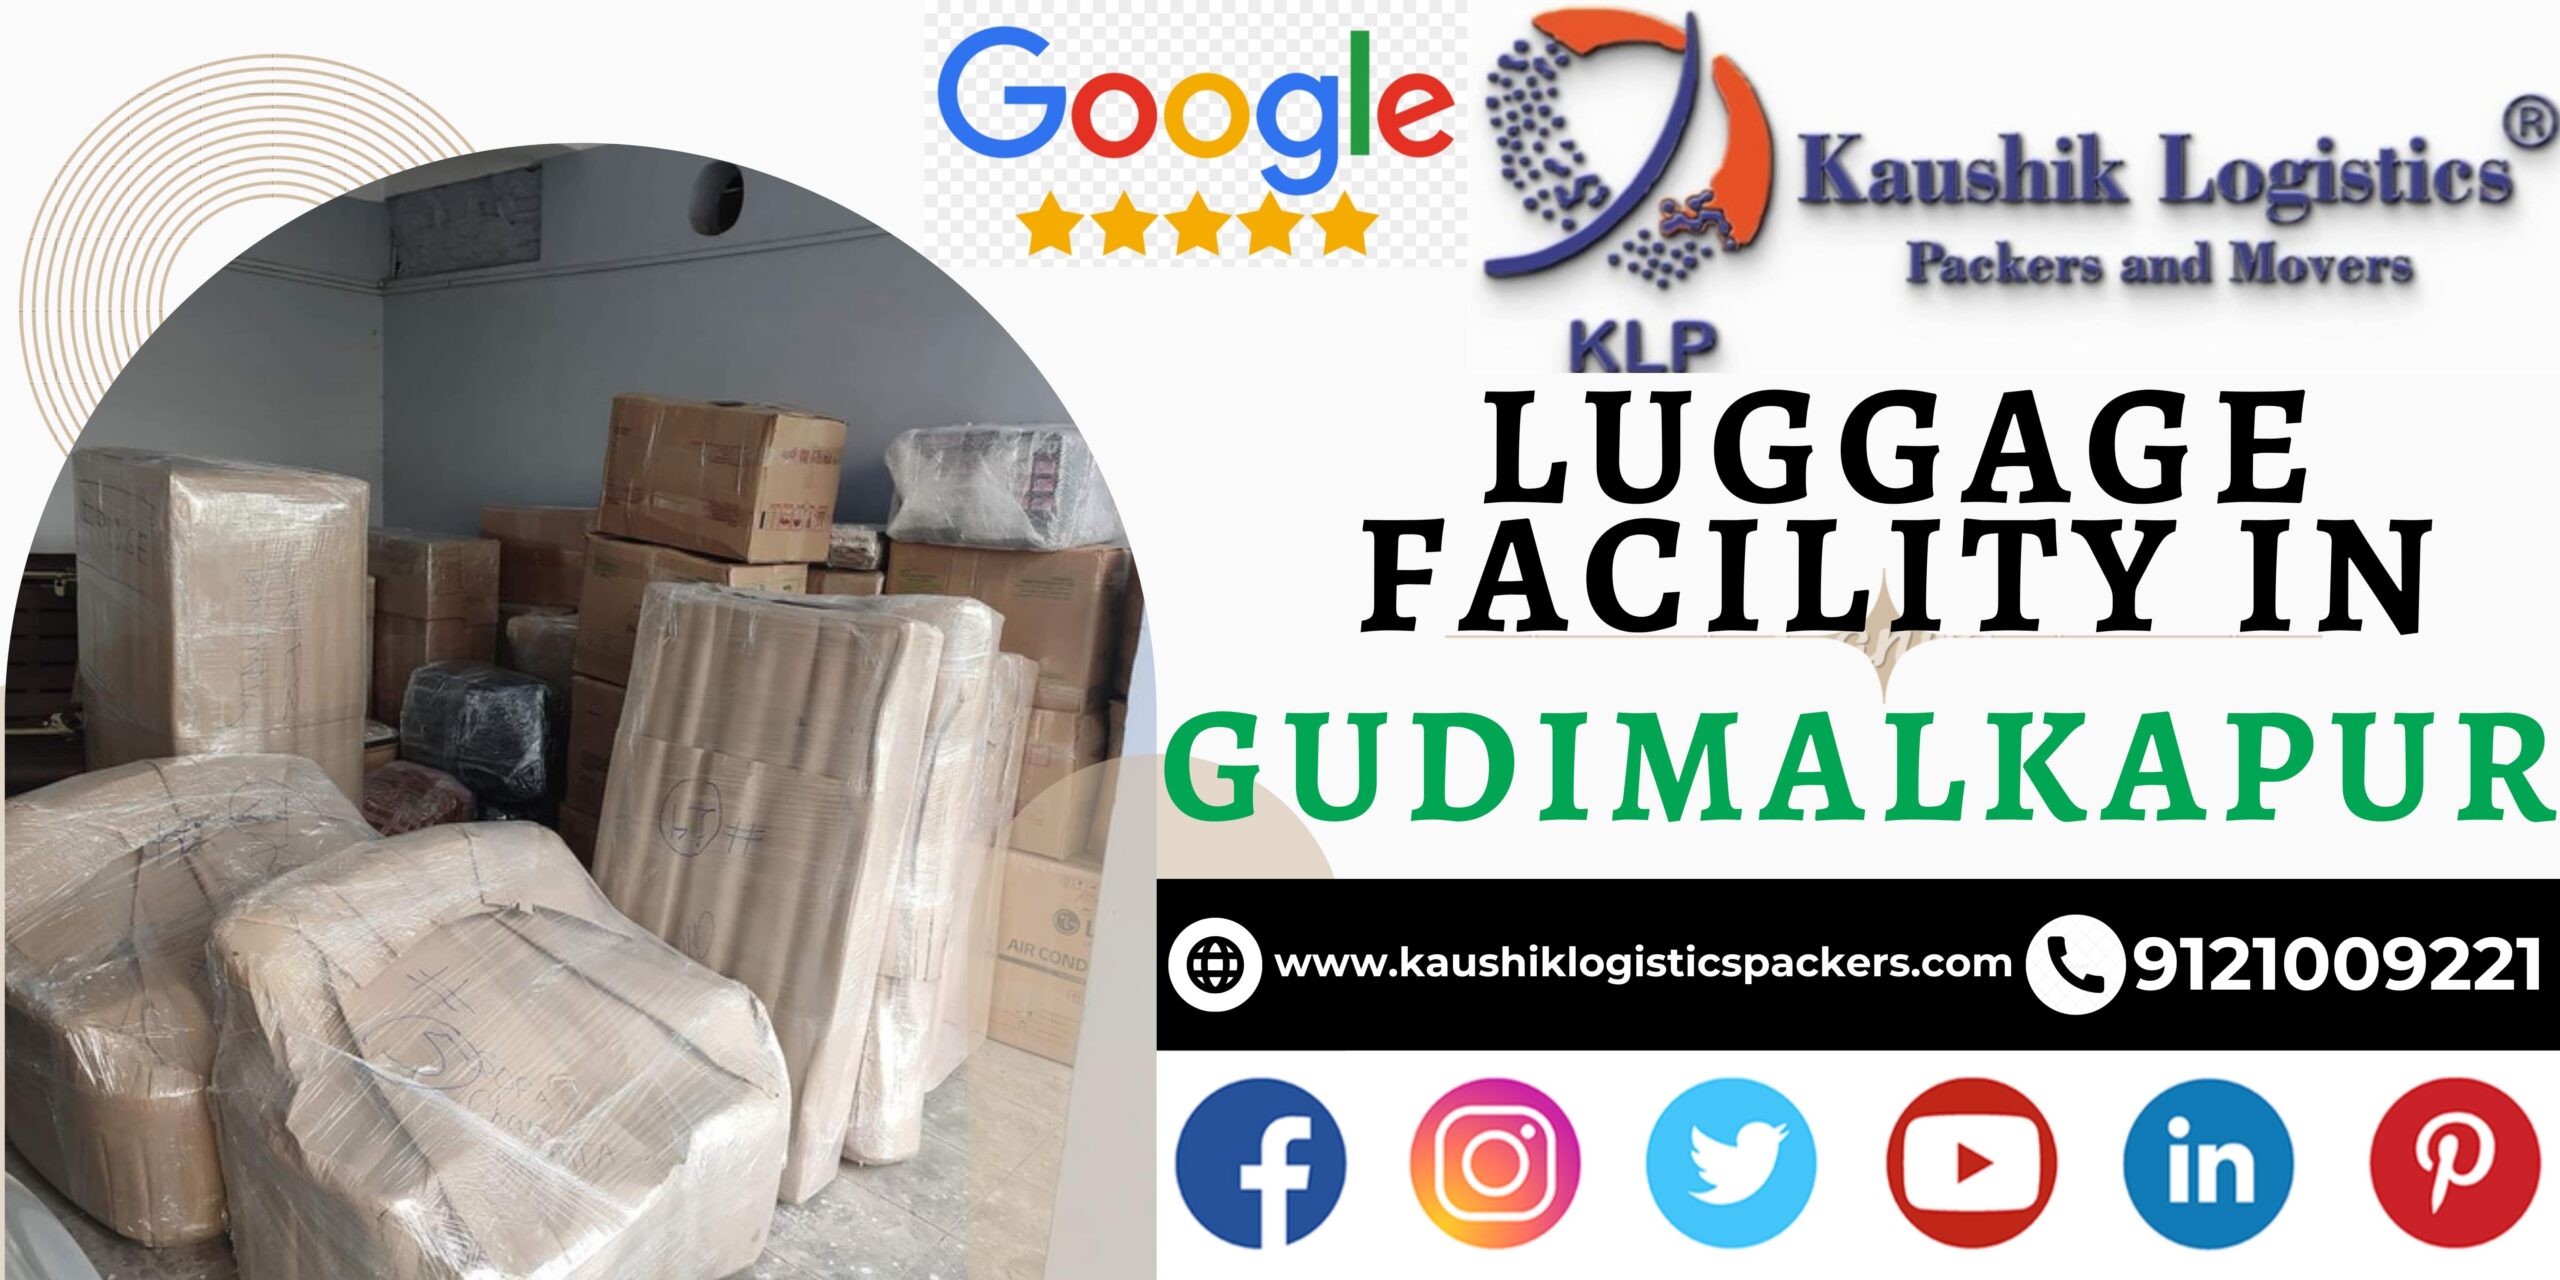 Packers and Movers In Gudimalkapur